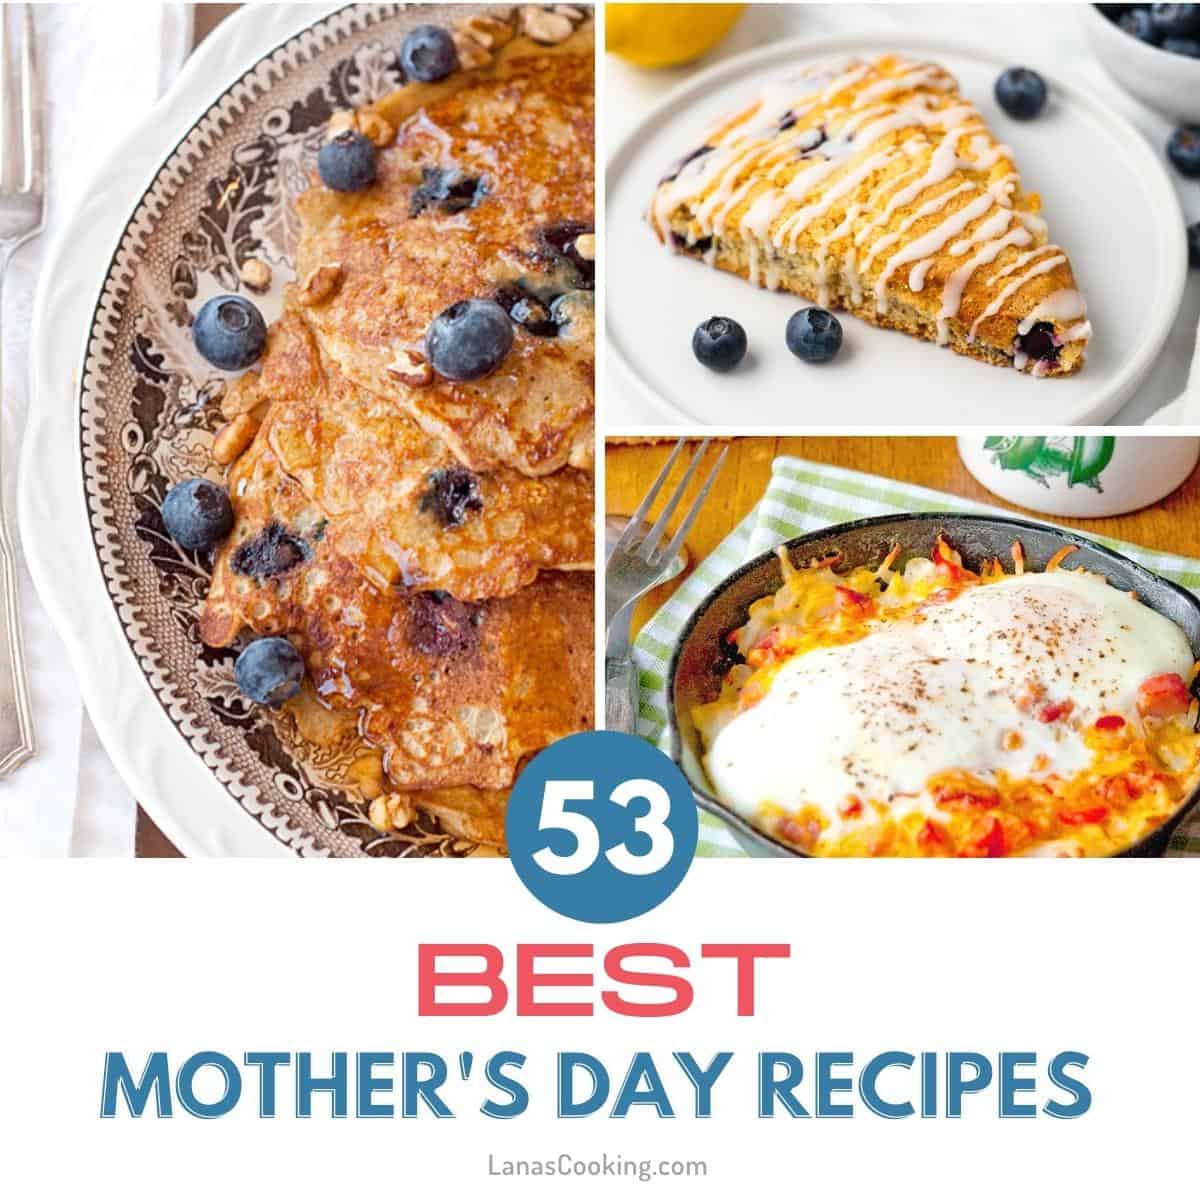 53 Best Mother's Day Recipes